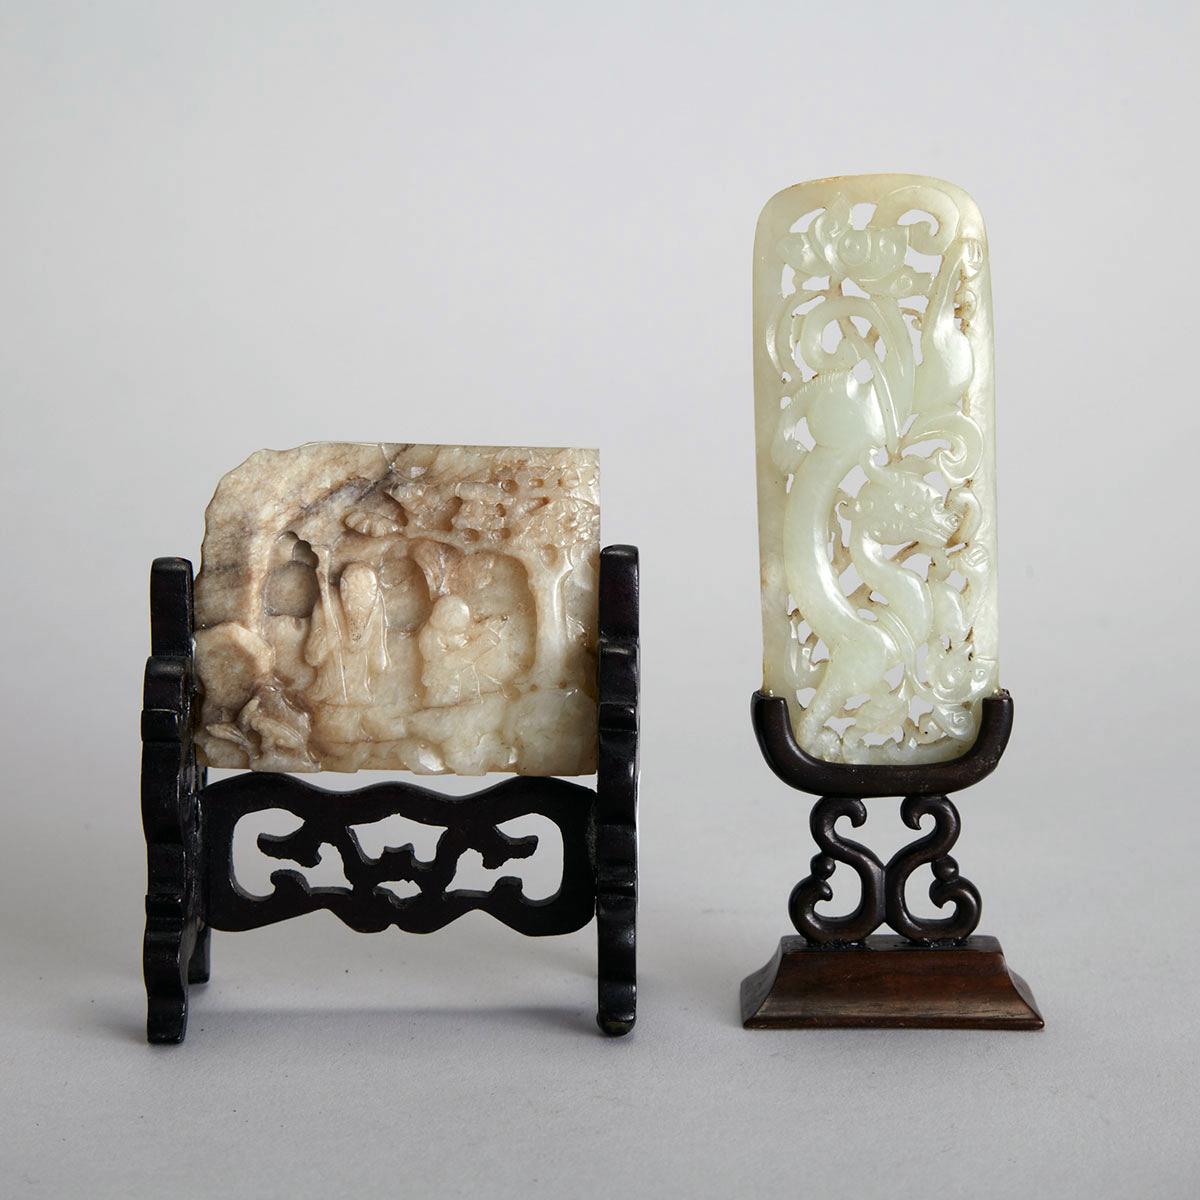 Two Jade Carvings, 17th to 19th Century